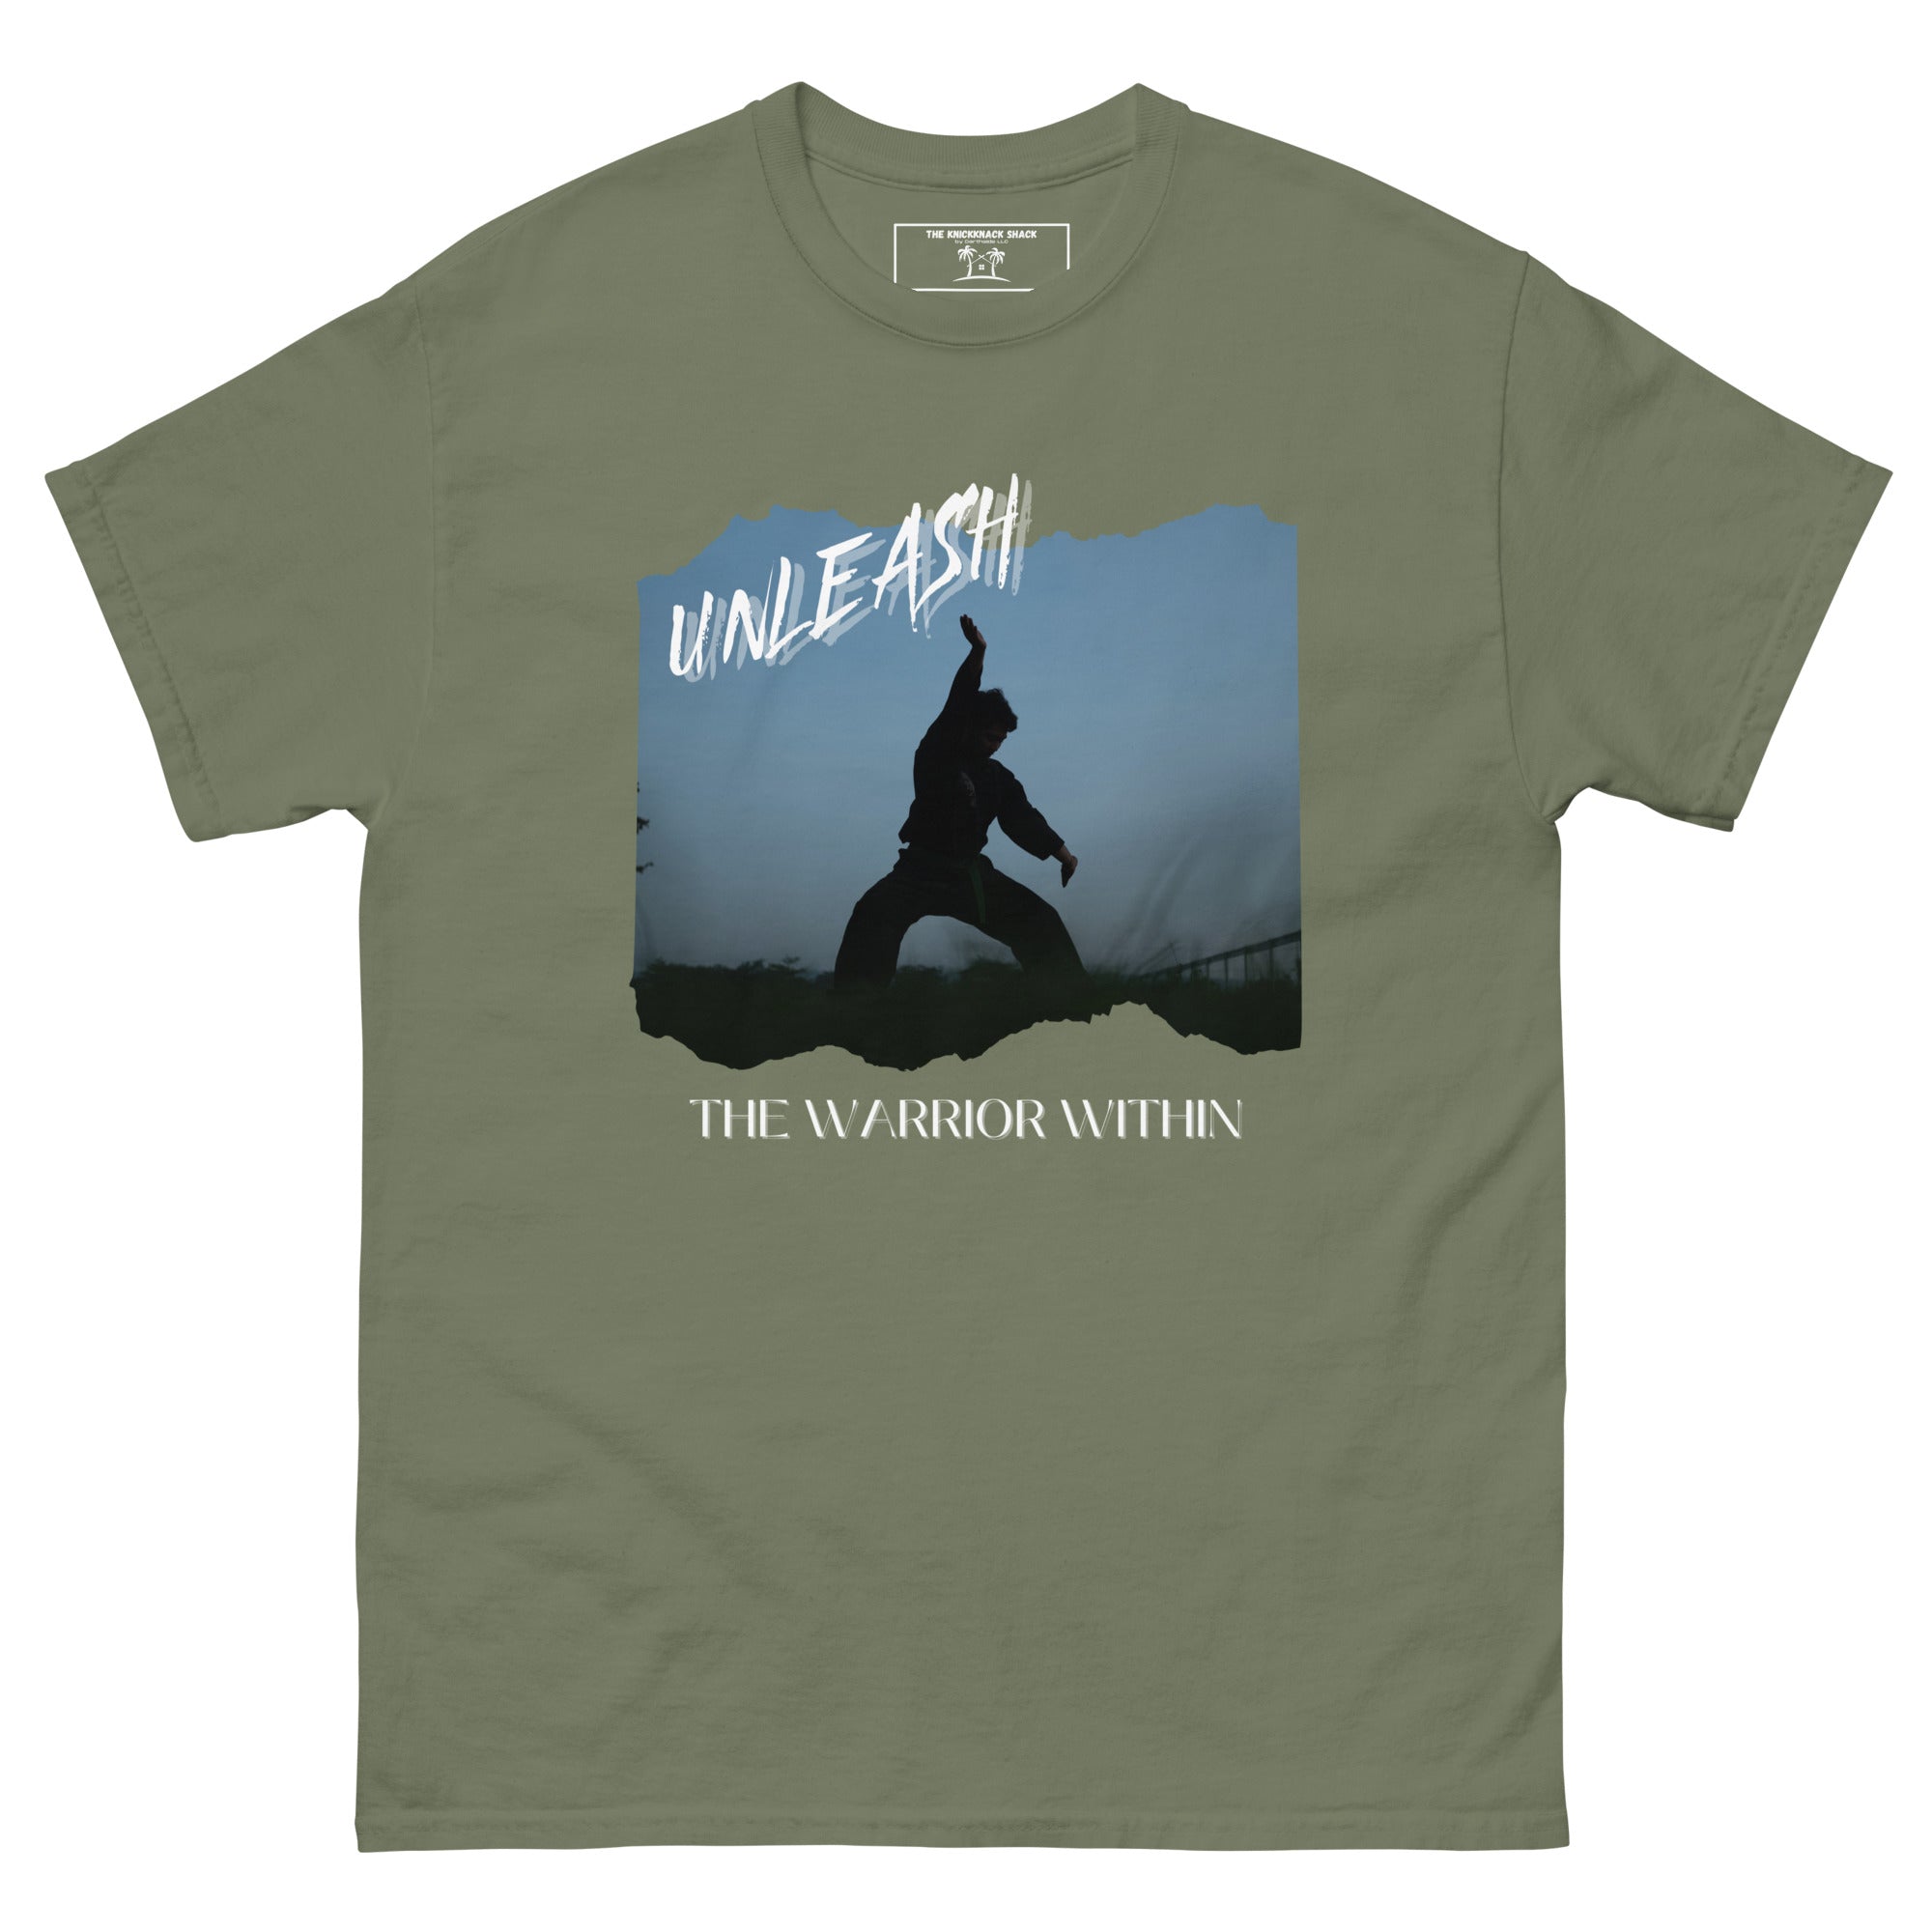 Classic Tee - Warrior Within 3 (Dark Colors)